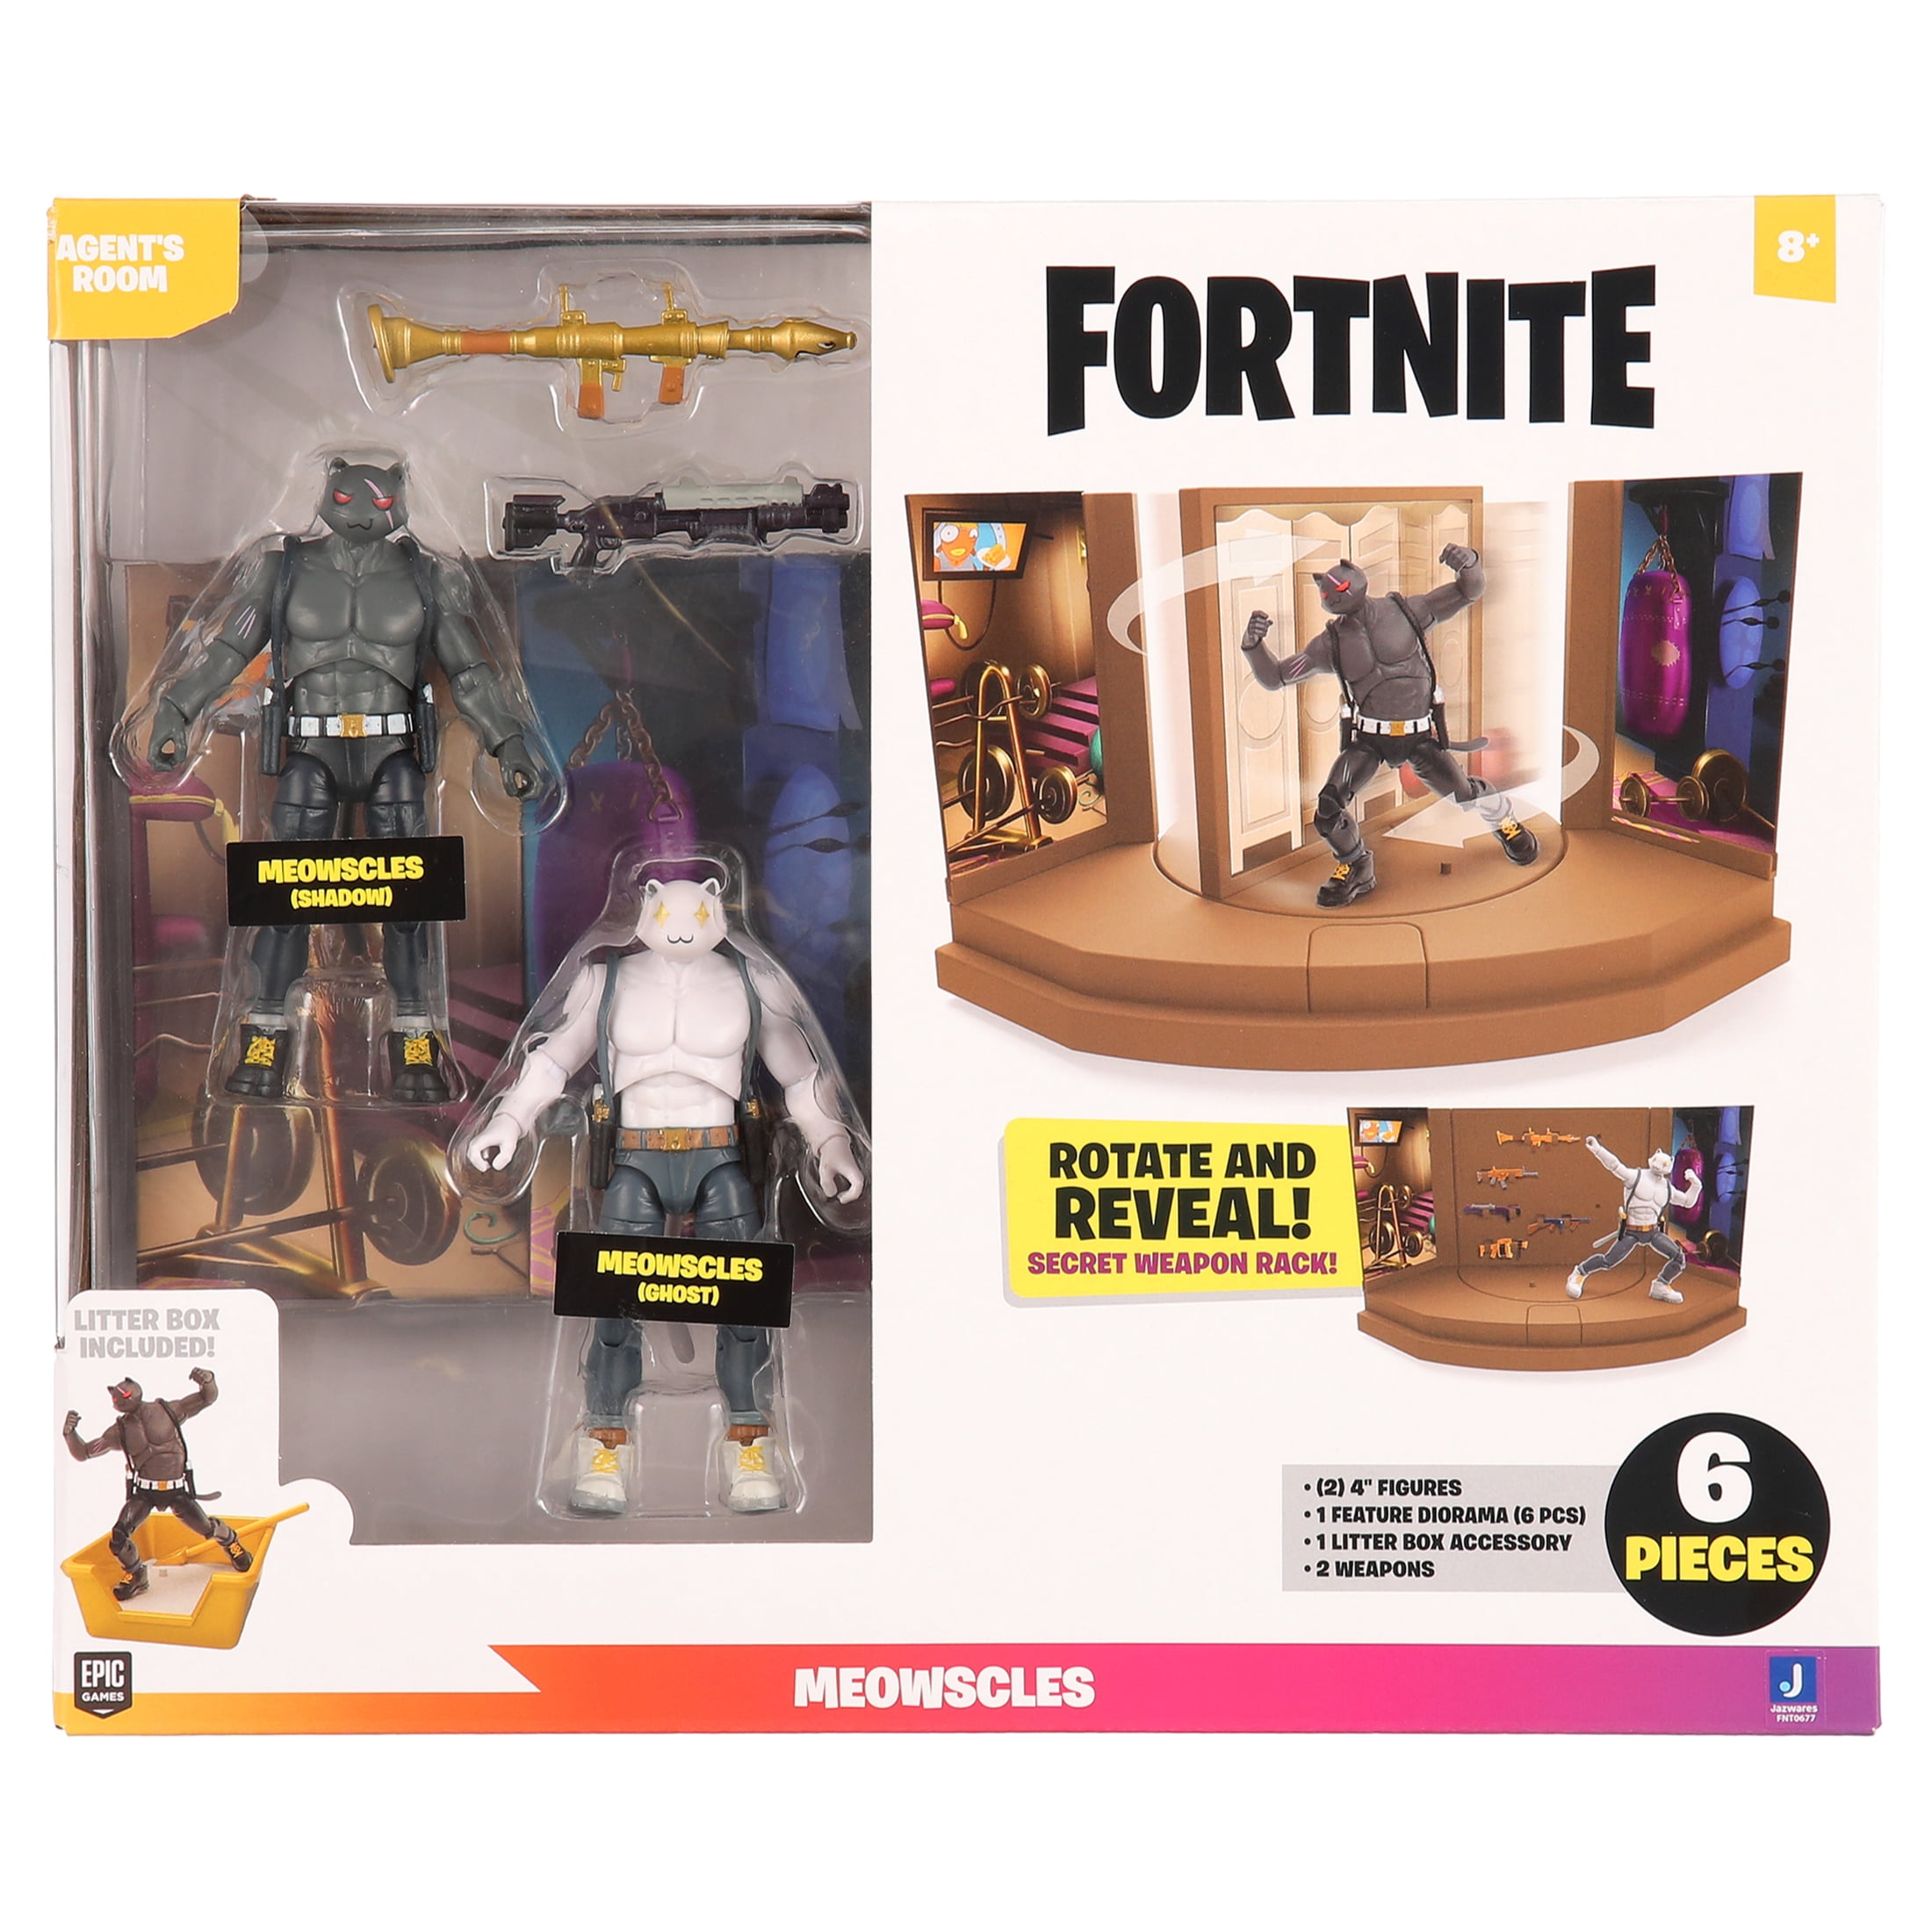 lyse tak skal du have brochure Fortnite Agent's Room Assortment, includes 2 (4-inch) Articulated Figures,  Playset with Secret Passageway, Legendary Accessories, Weapons, Accessory  Storage - Walmart.com